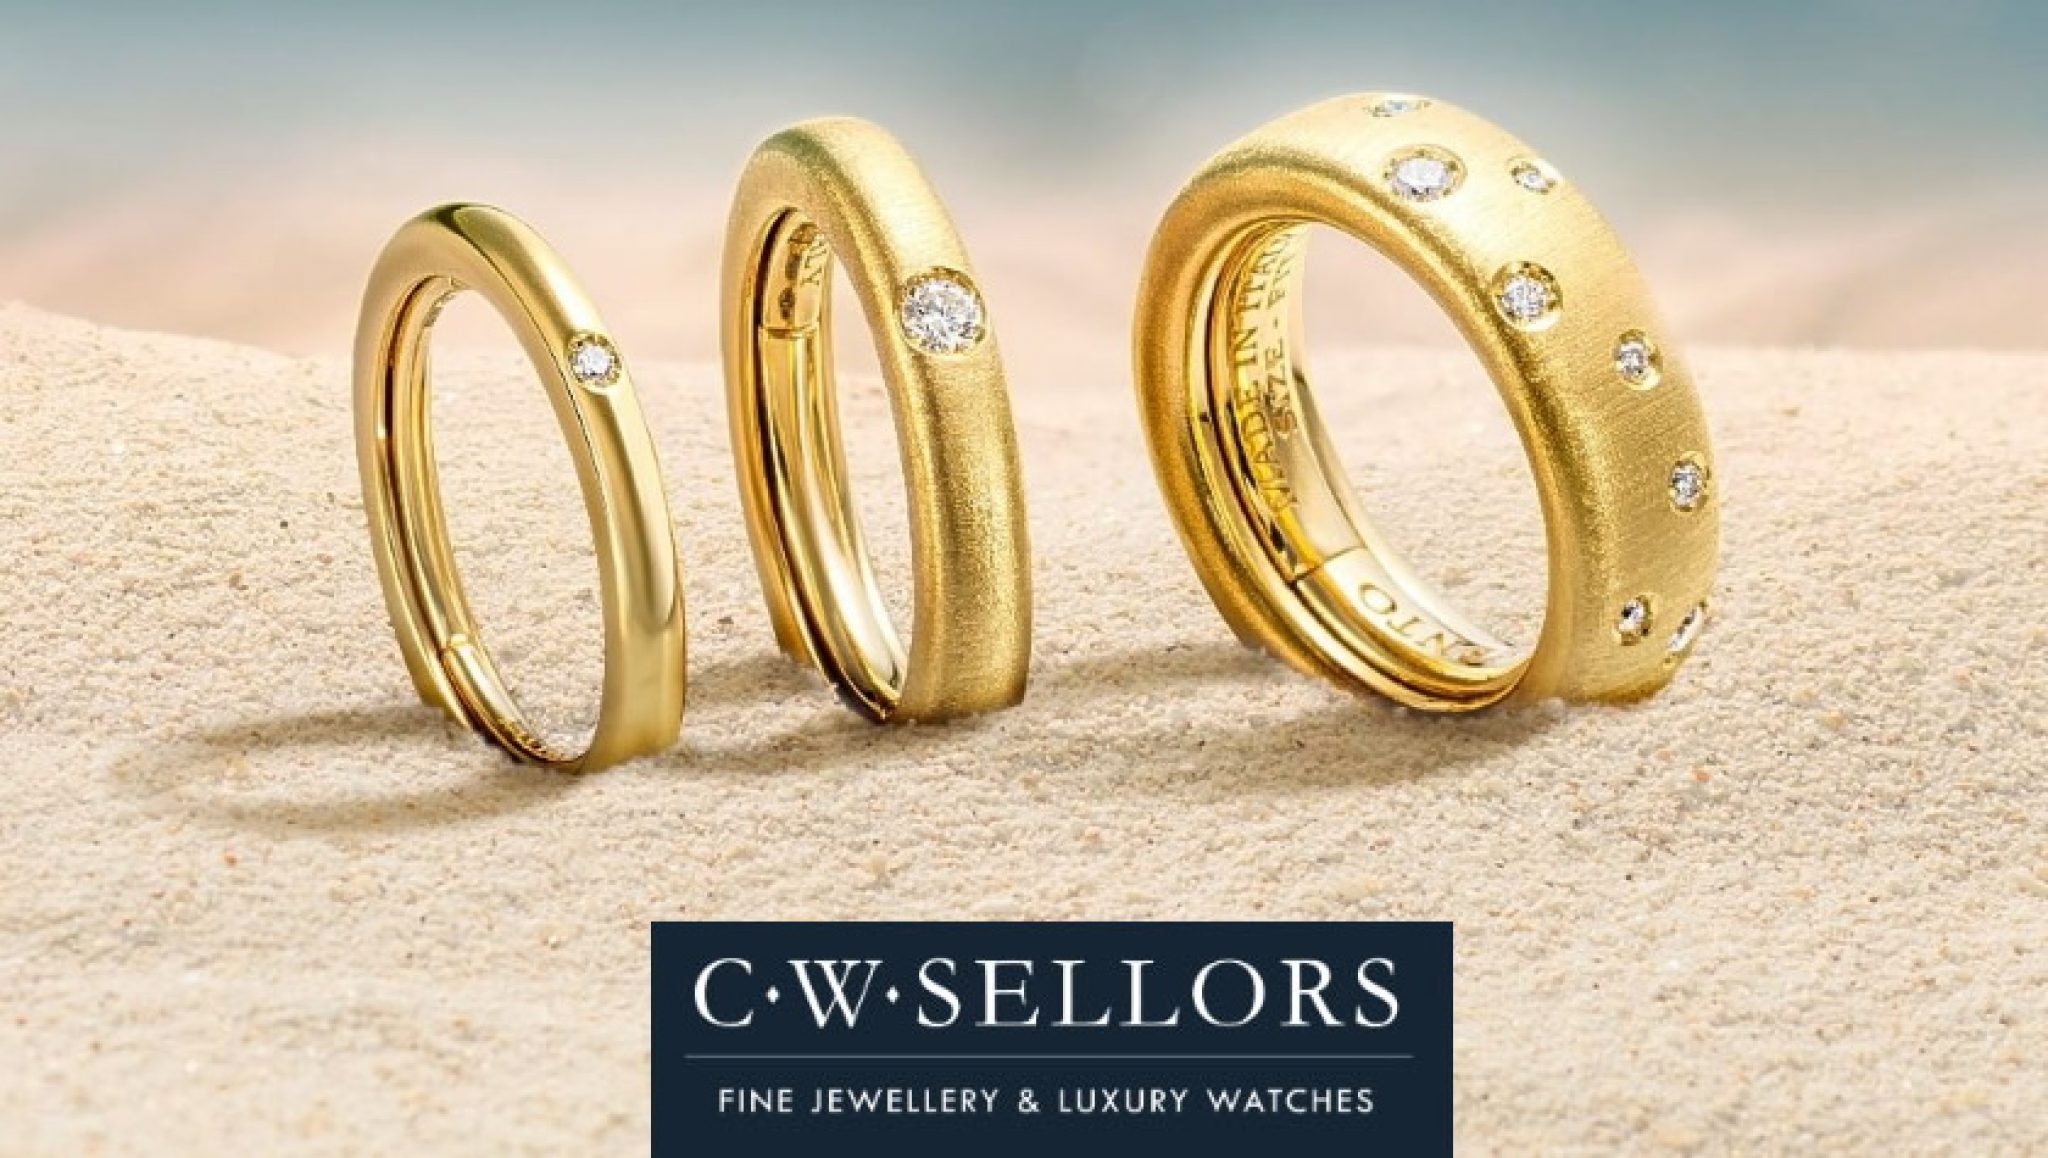 CW Sellors NHS Discount - 20% off Jewellery & 12% off Watches